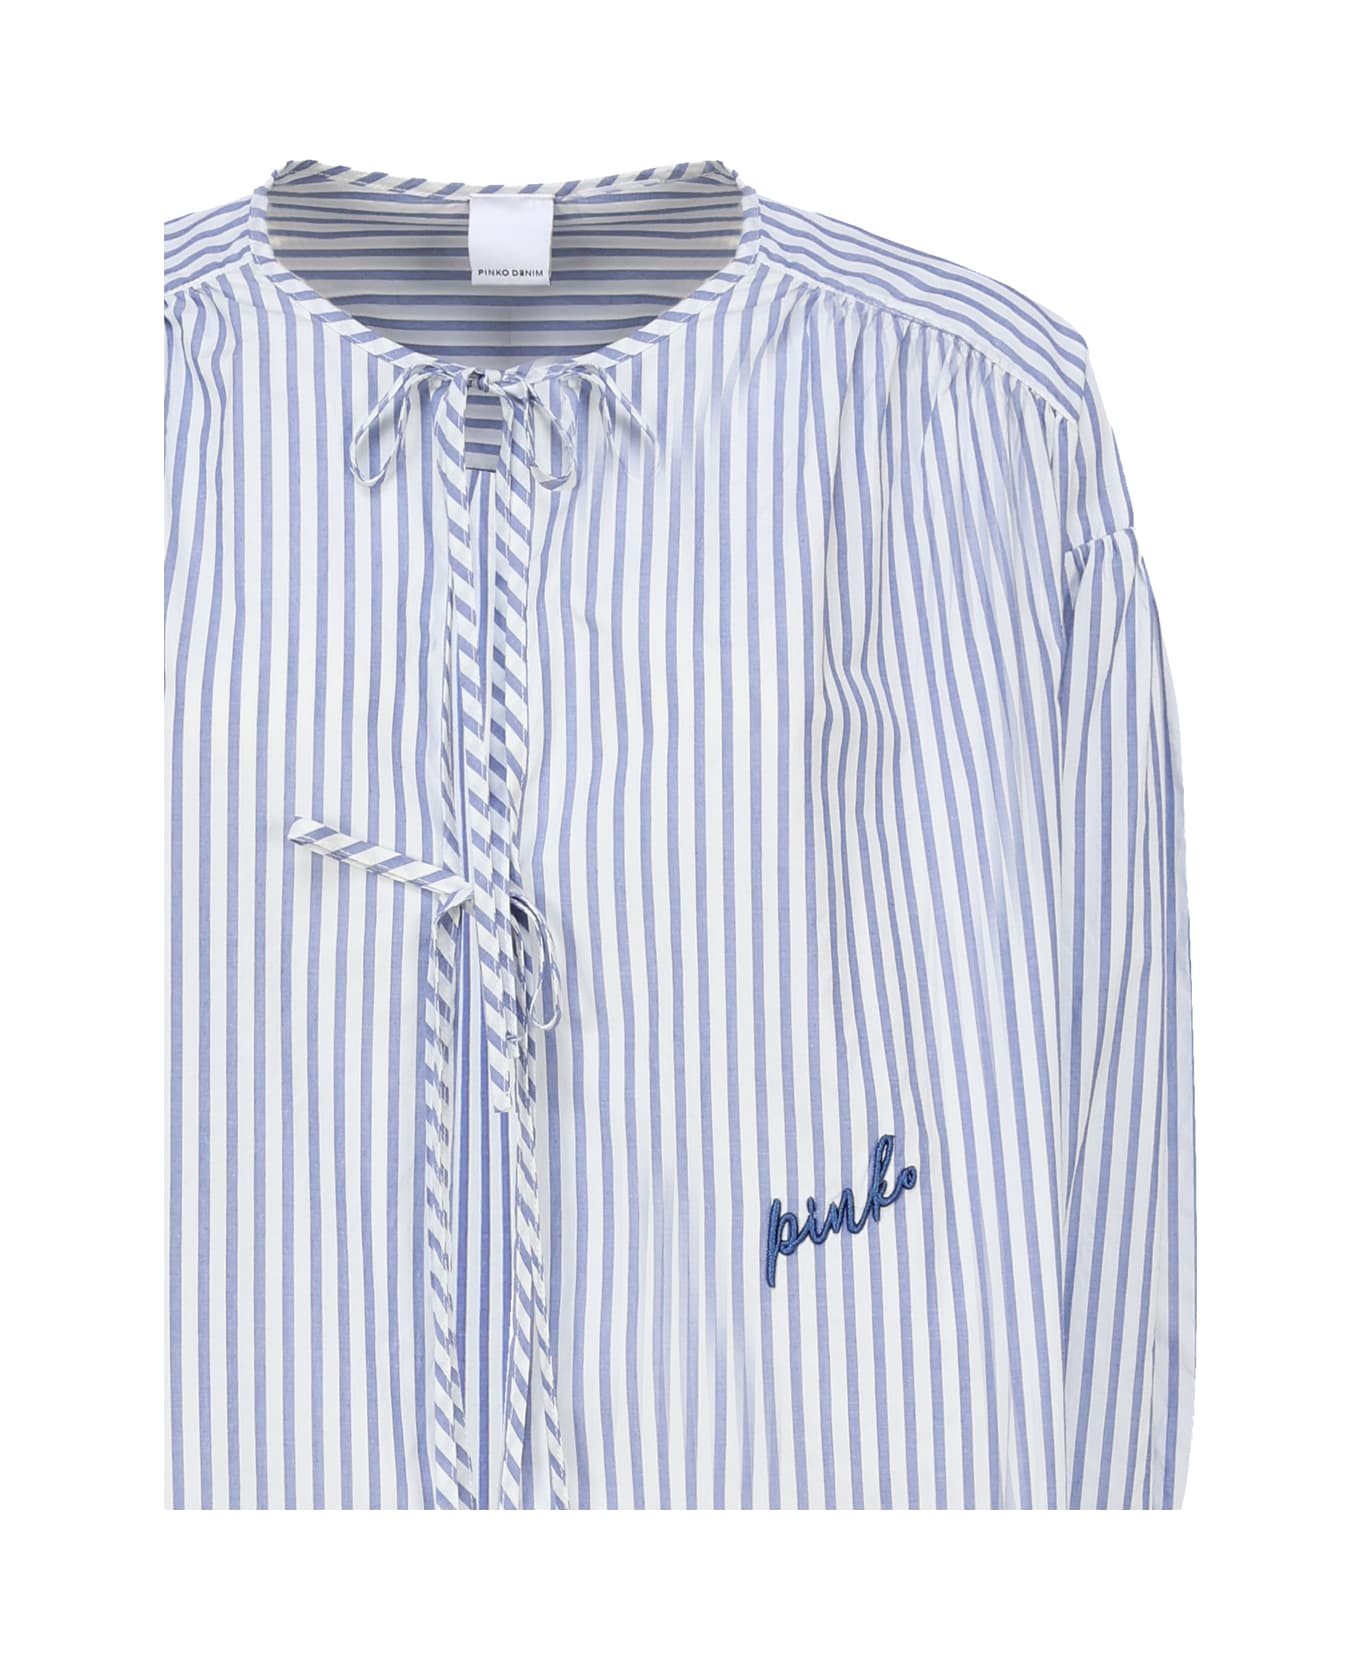 Pinko Striped Shirt With Bare Shoulders - Light blue, white